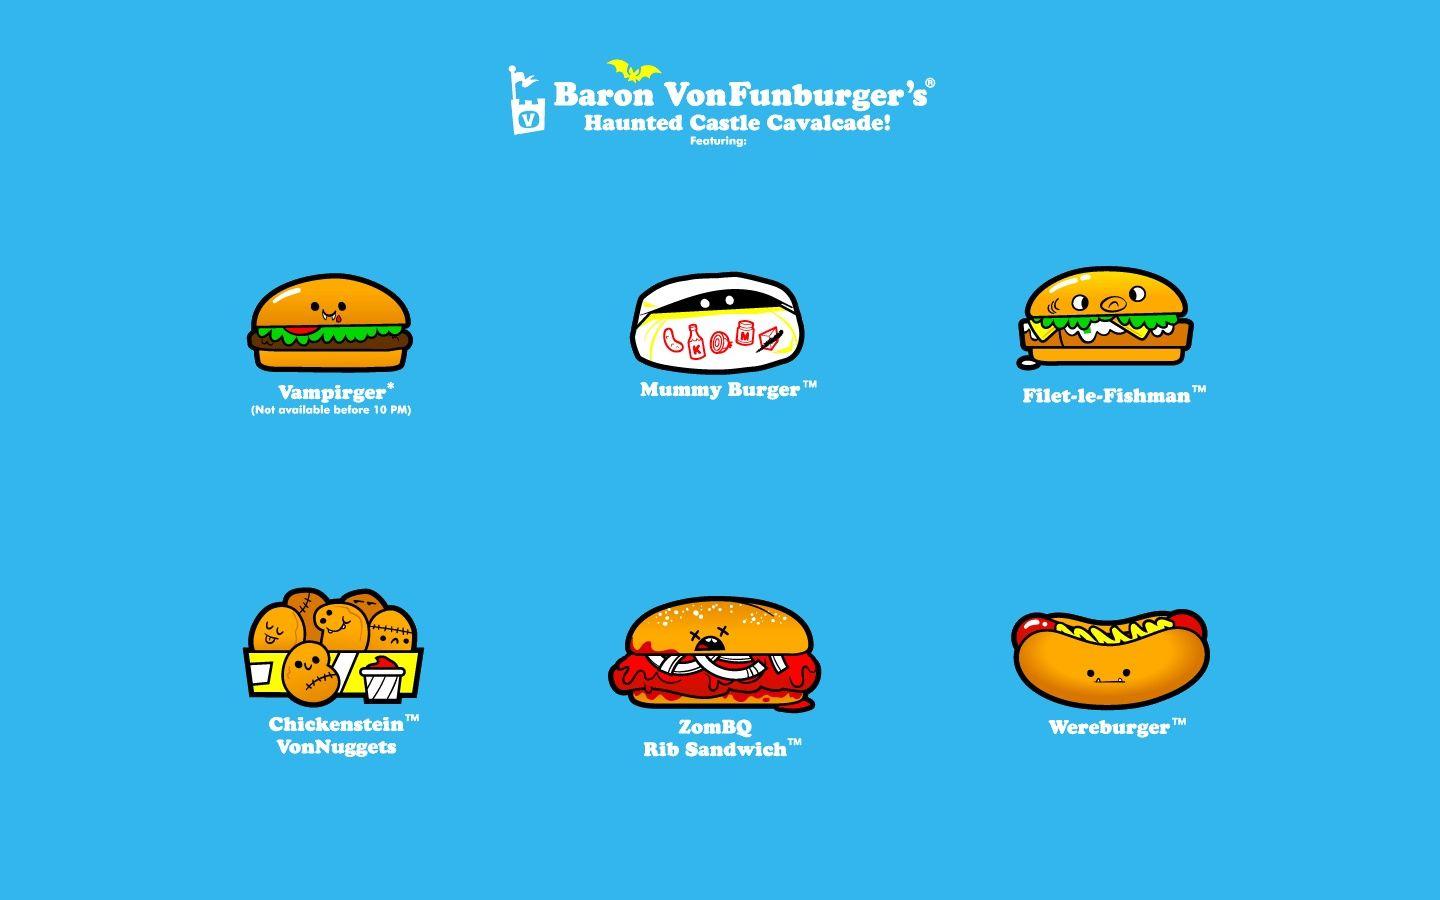 Download the Dead Fast Food Wallpaper, Dead Fast Food iPhone